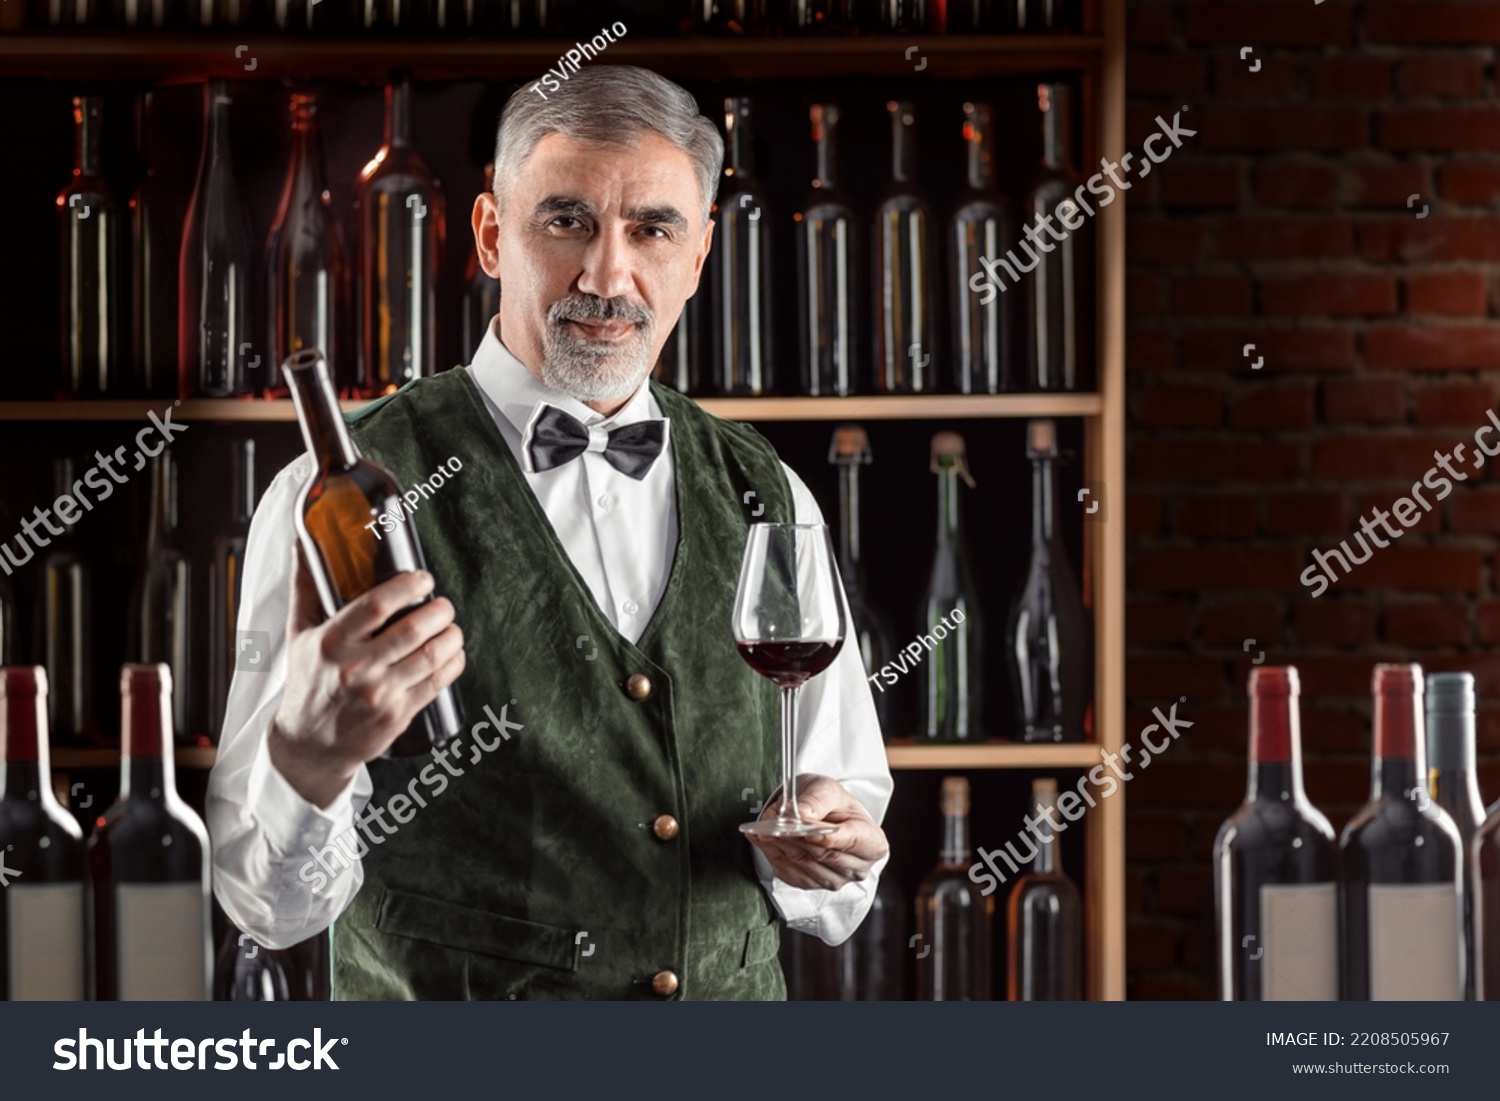 Sommelier with a glass of wine. Examination of wine products. Restaurant staff, expert wine steward among shelves of wine bottles. Stylish middle-aged man with a grey beard. #2208505967